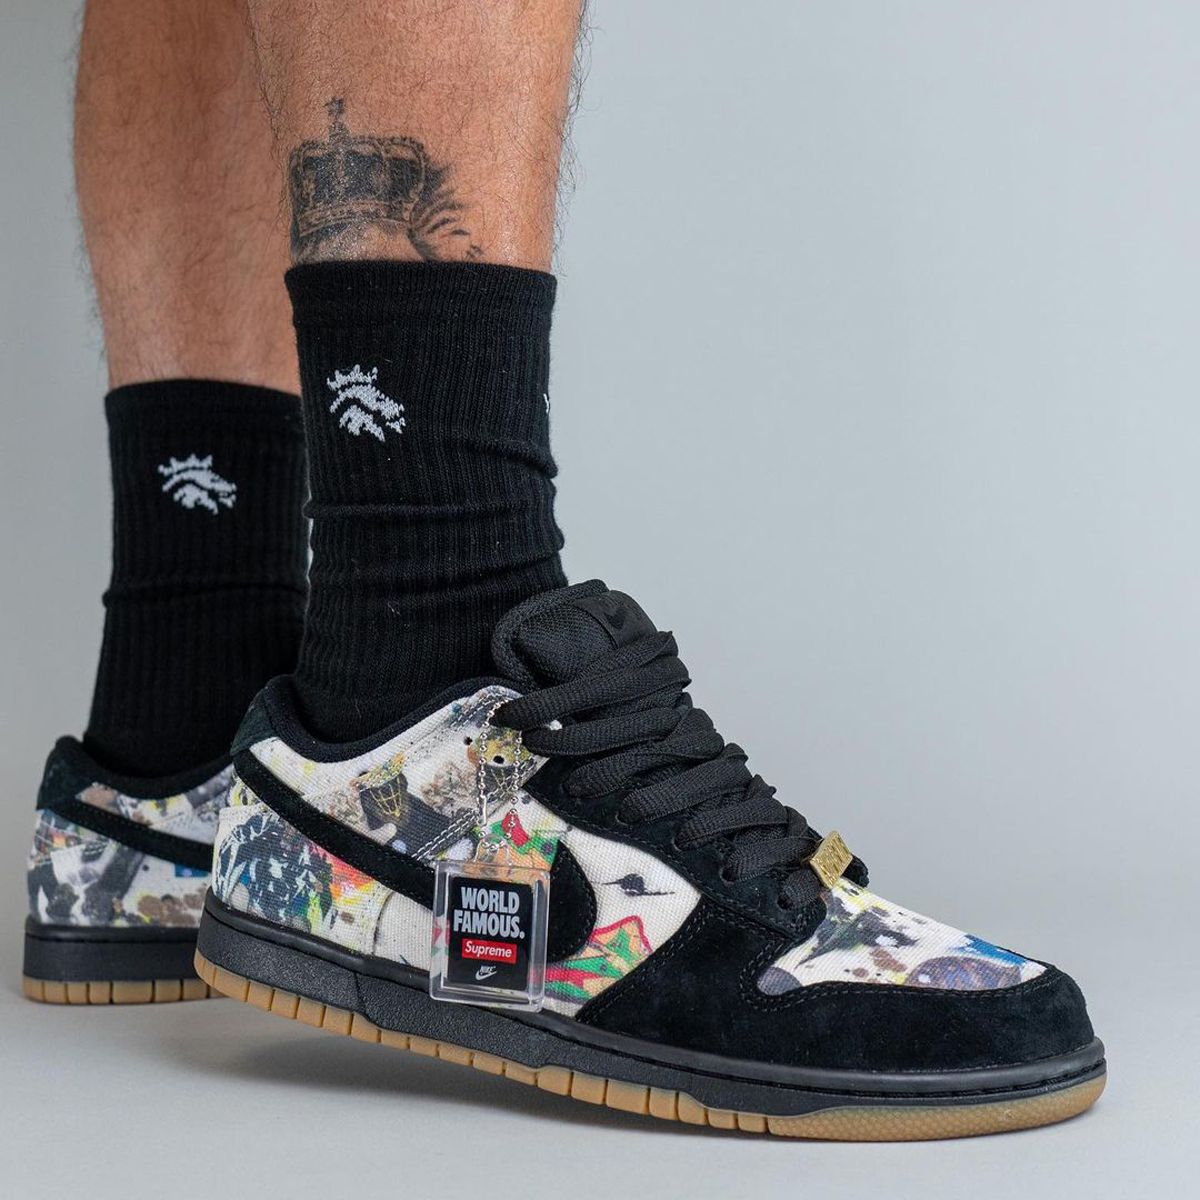 Supreme x Nike SB Dunk “Rammellzee Pack” Releases August 31